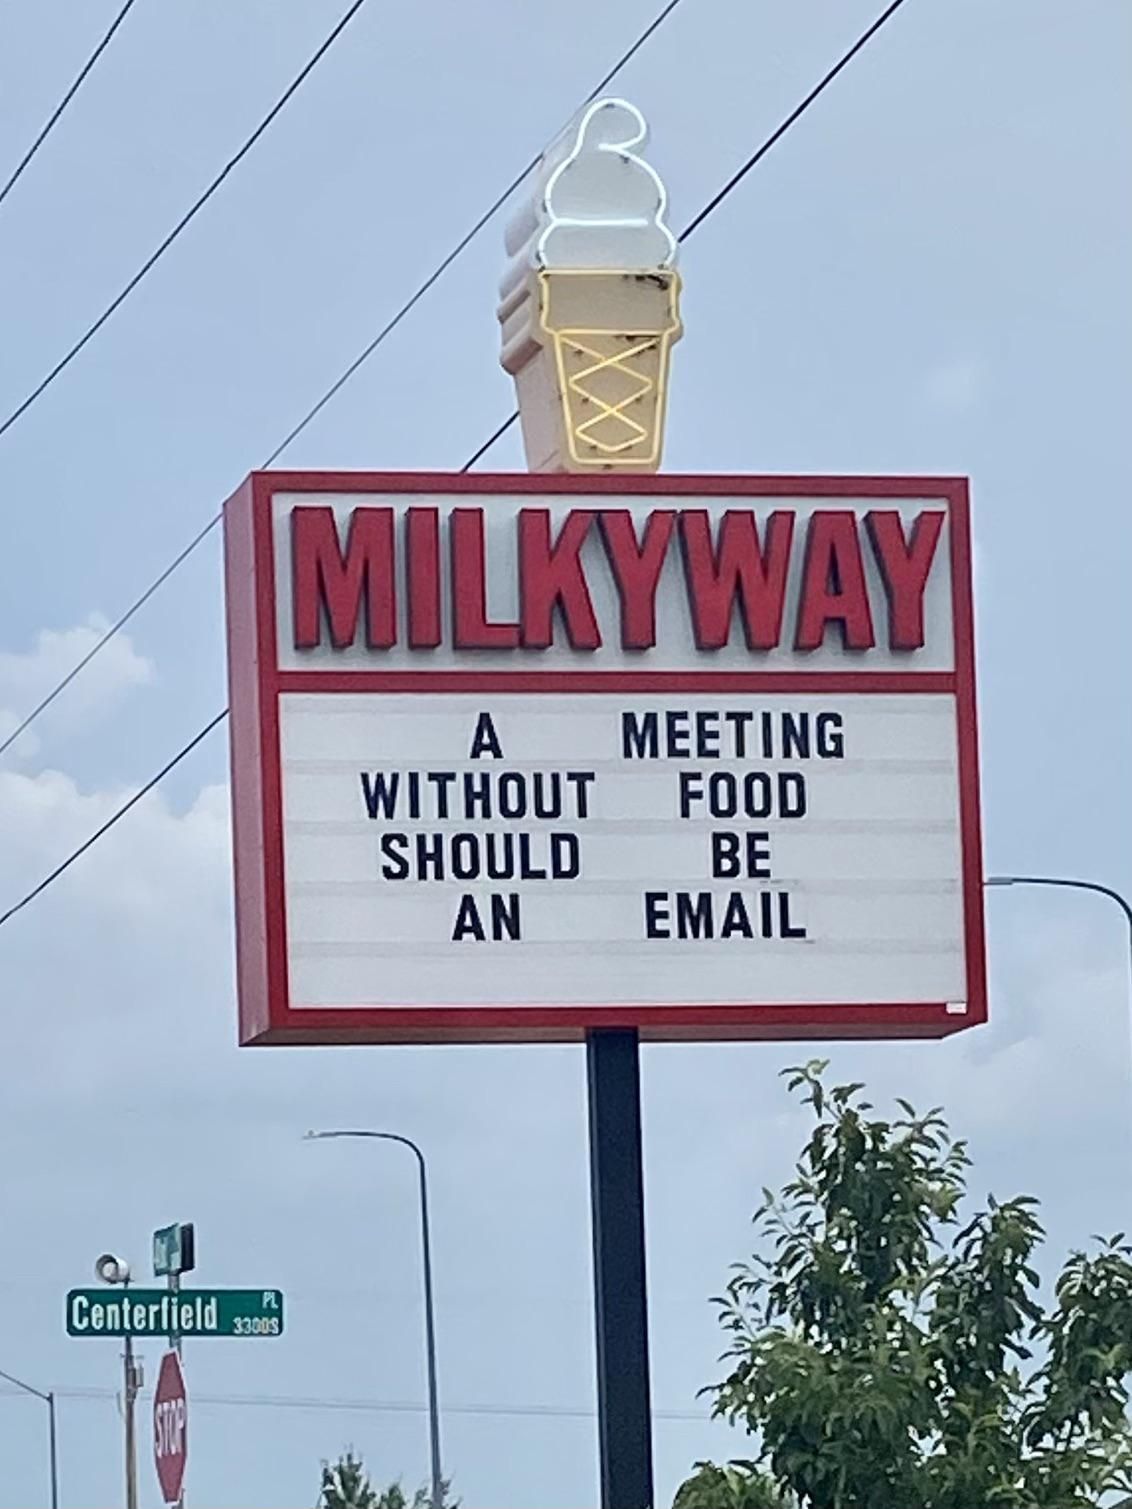 My local ice cream shop needs to contact our bosses.